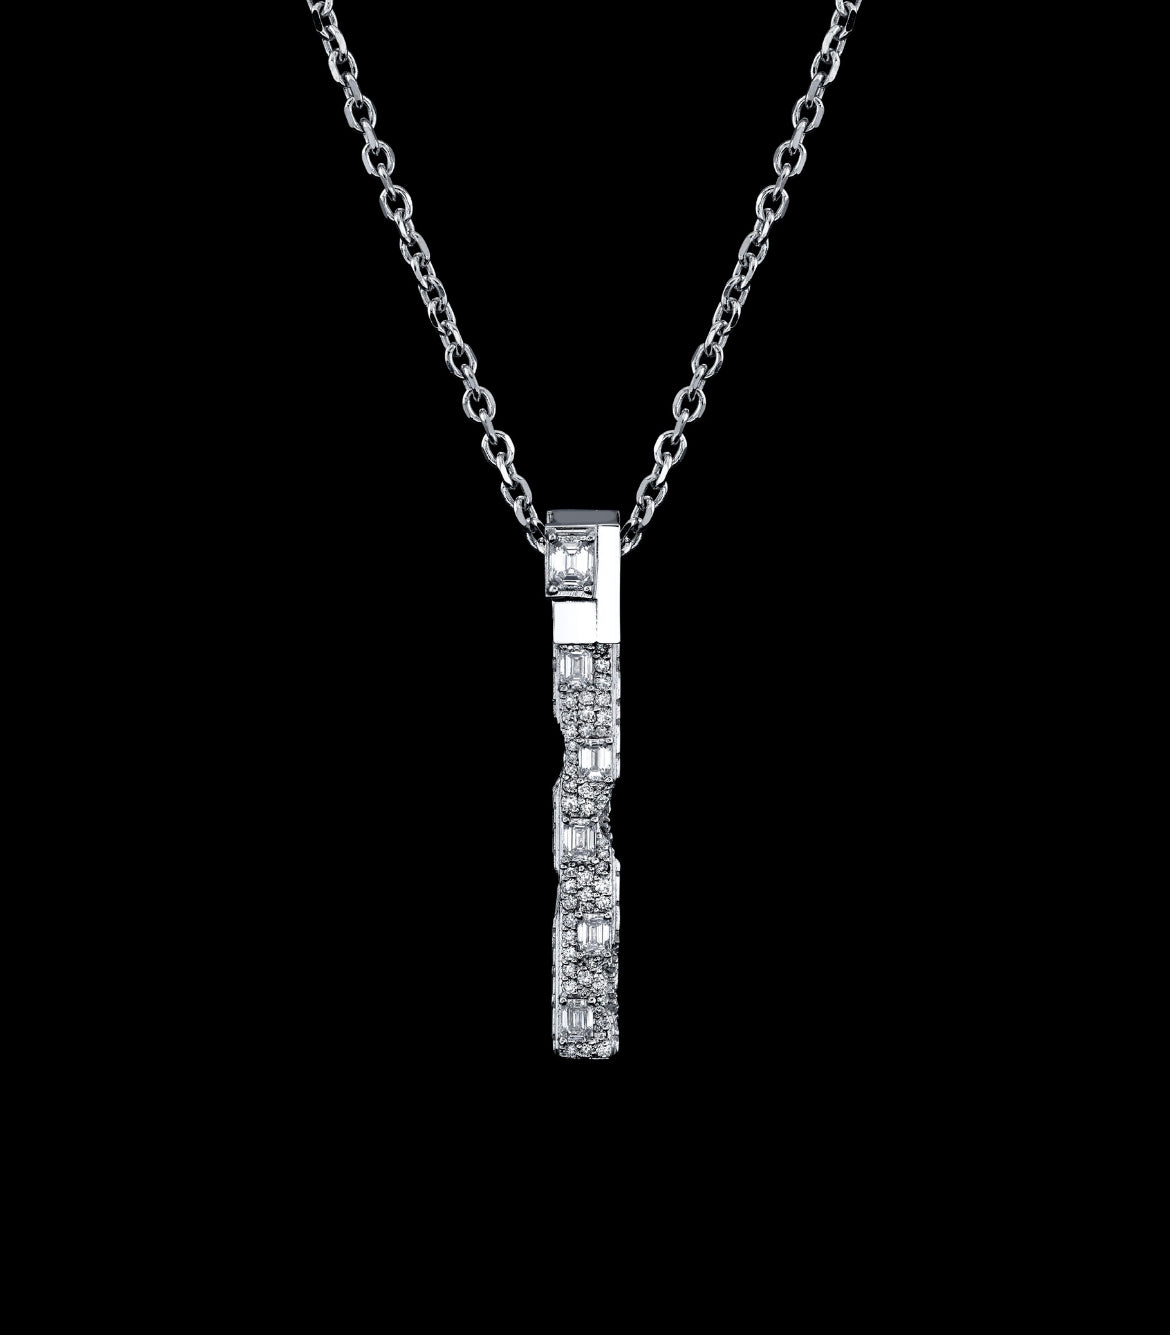 Eroded Architecture 18k White Gold Large Bar Necklace with 10 point emerald cut + round brilliant pave set diamonds.  Edition of 10.